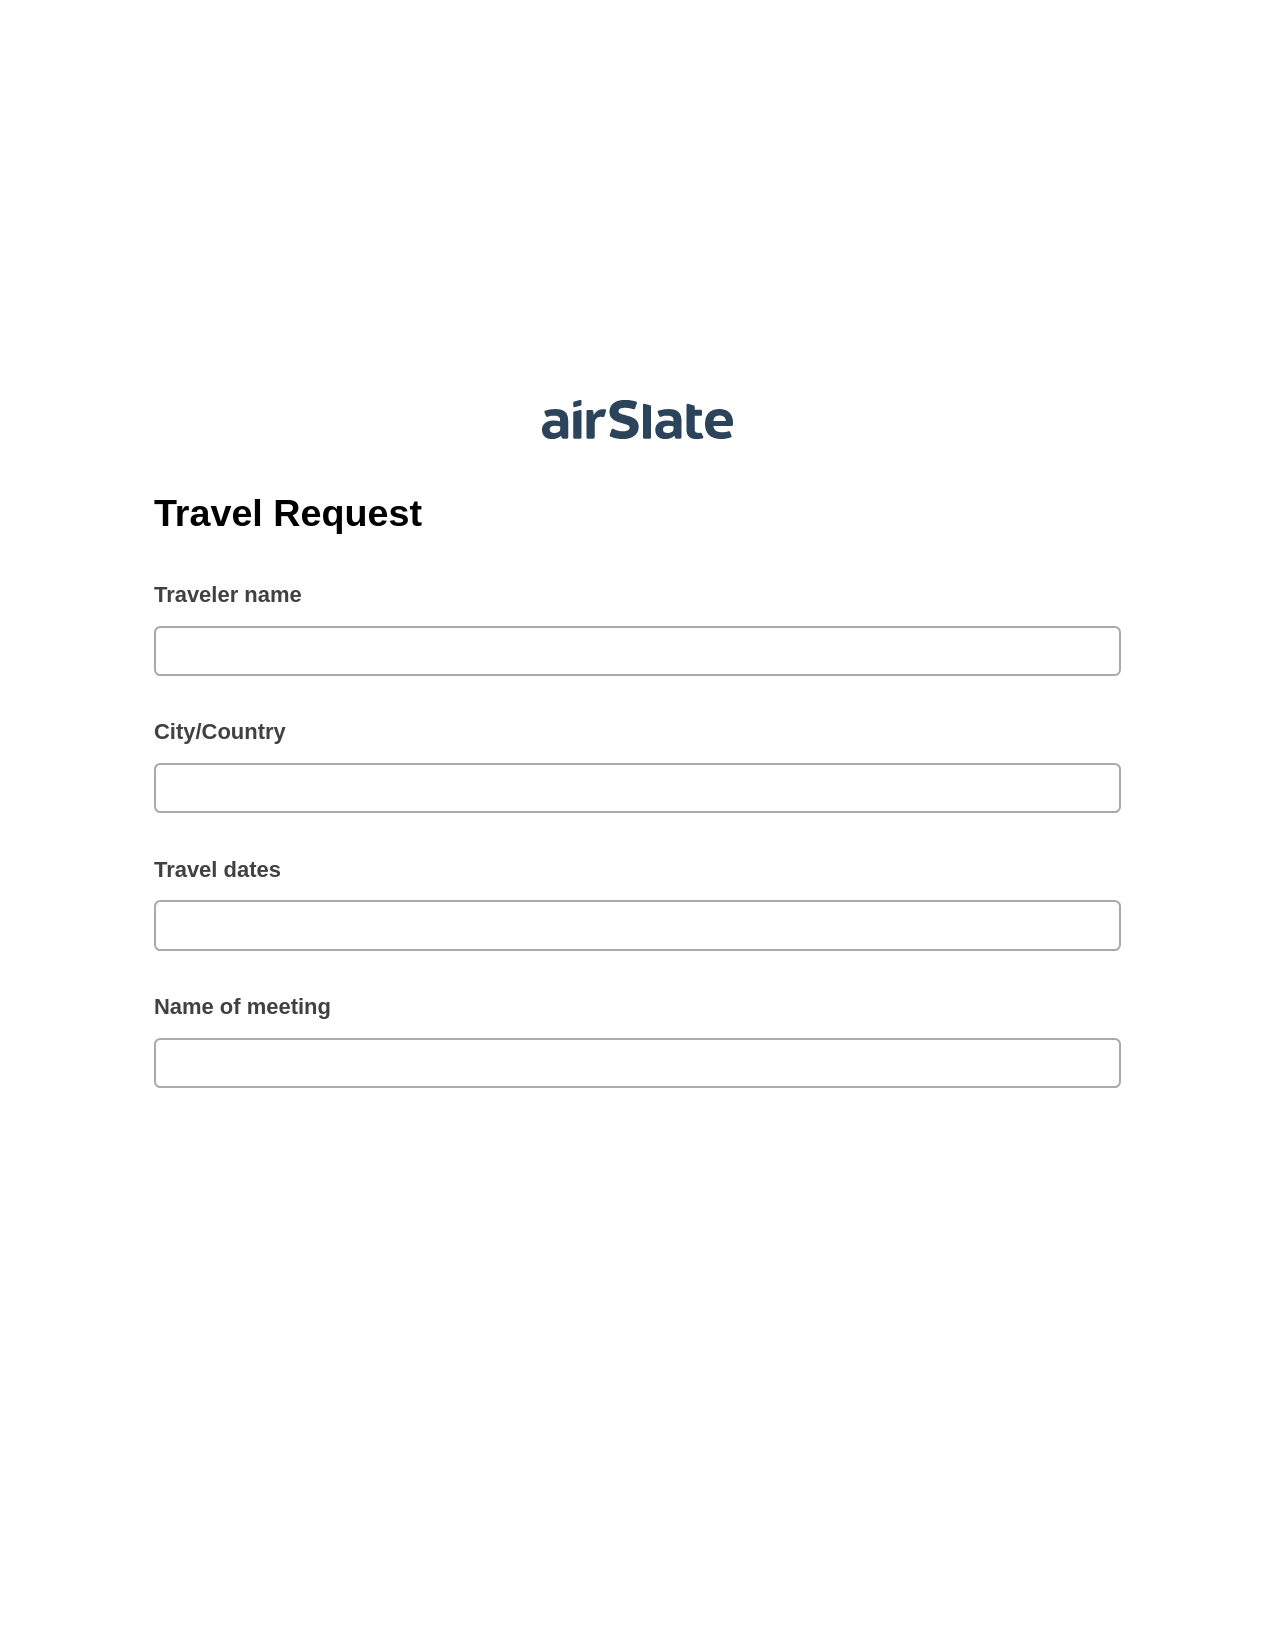 Multirole Travel Request Pre-fill from CSV File Bot, Create slate addon, Email Notification Postfinish Bot